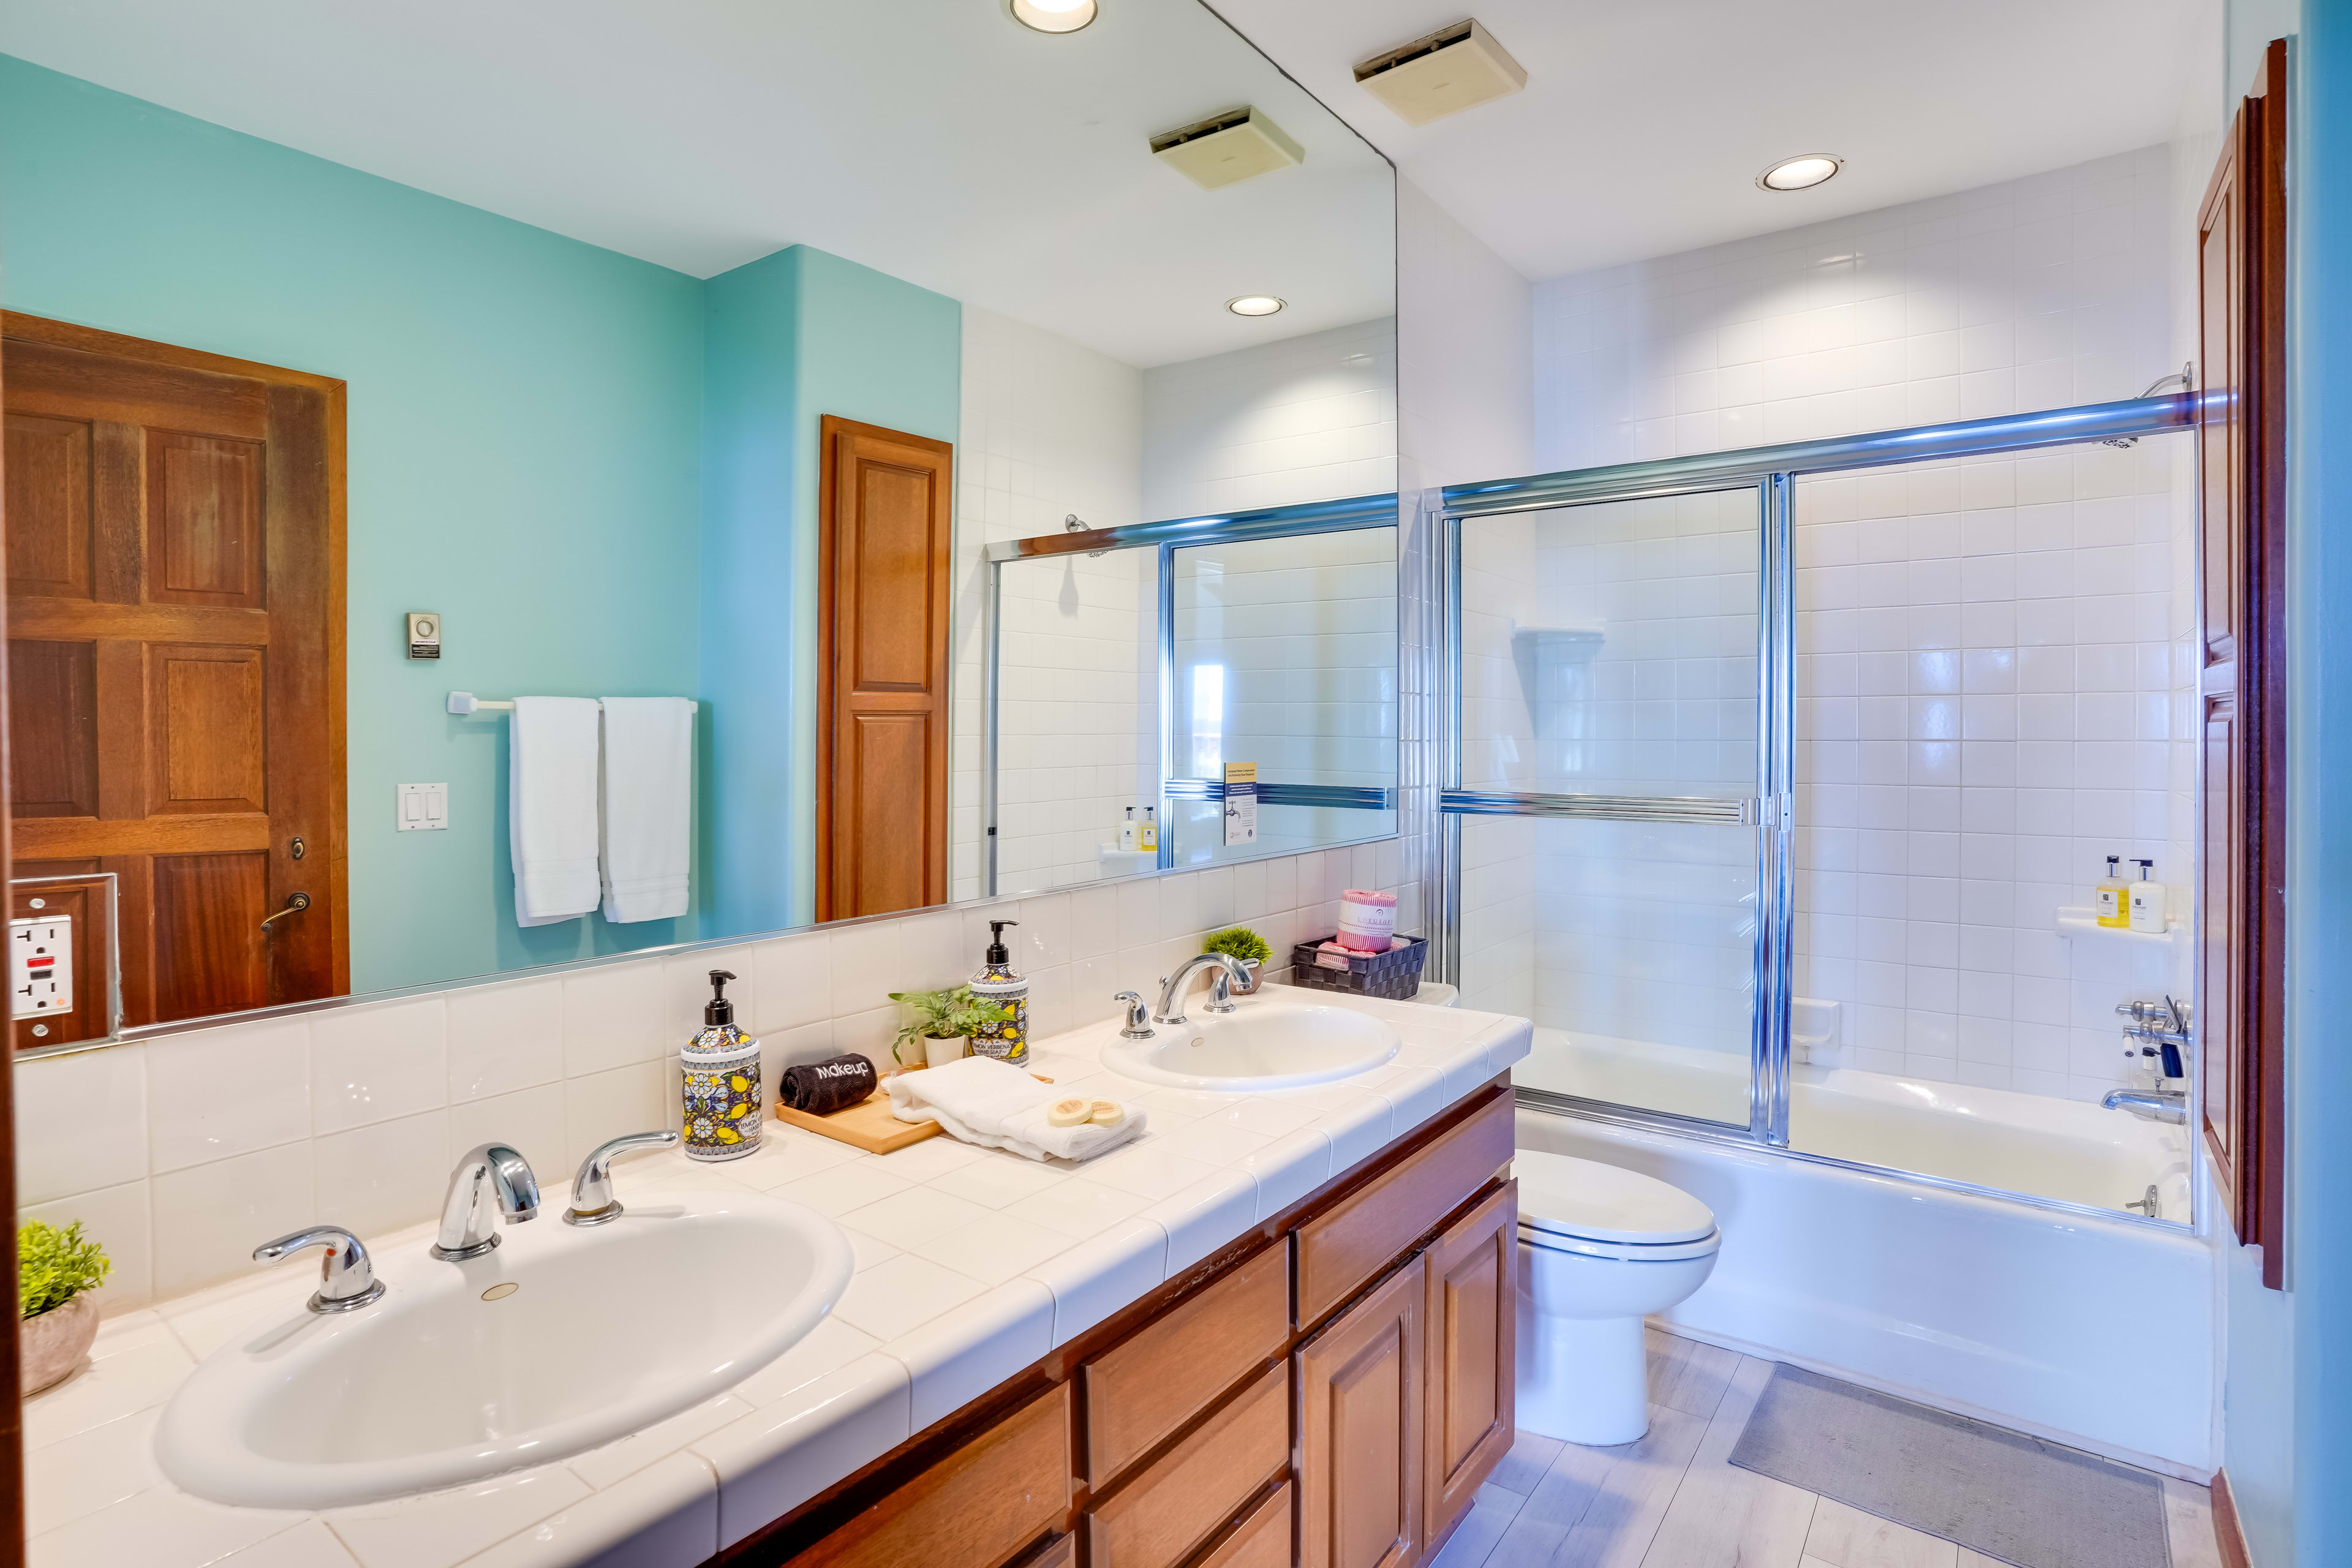 Bathroom | Linens & Towels Provided | Complimentary Toiletries